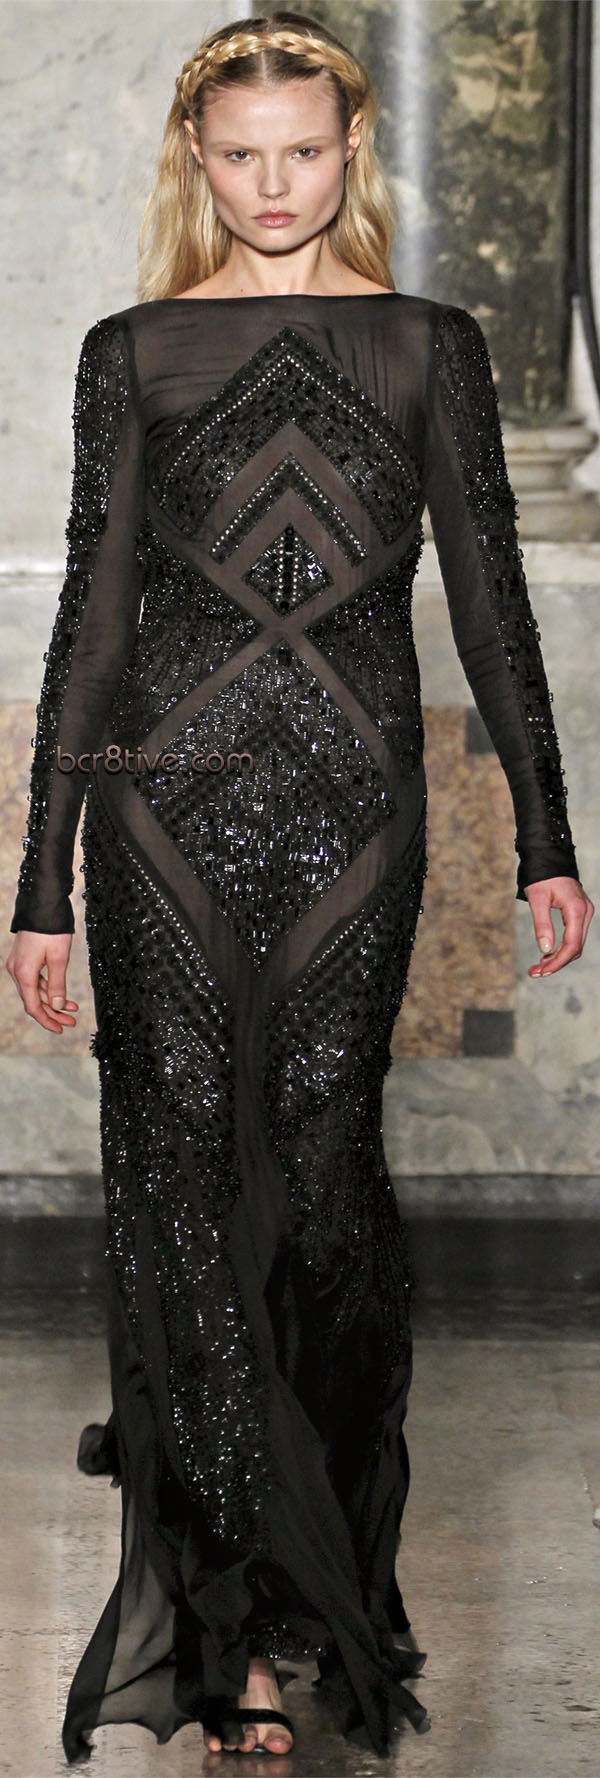 Emilio Pucci Fall Winter 2012 - 2013 Ready to Wear Collection